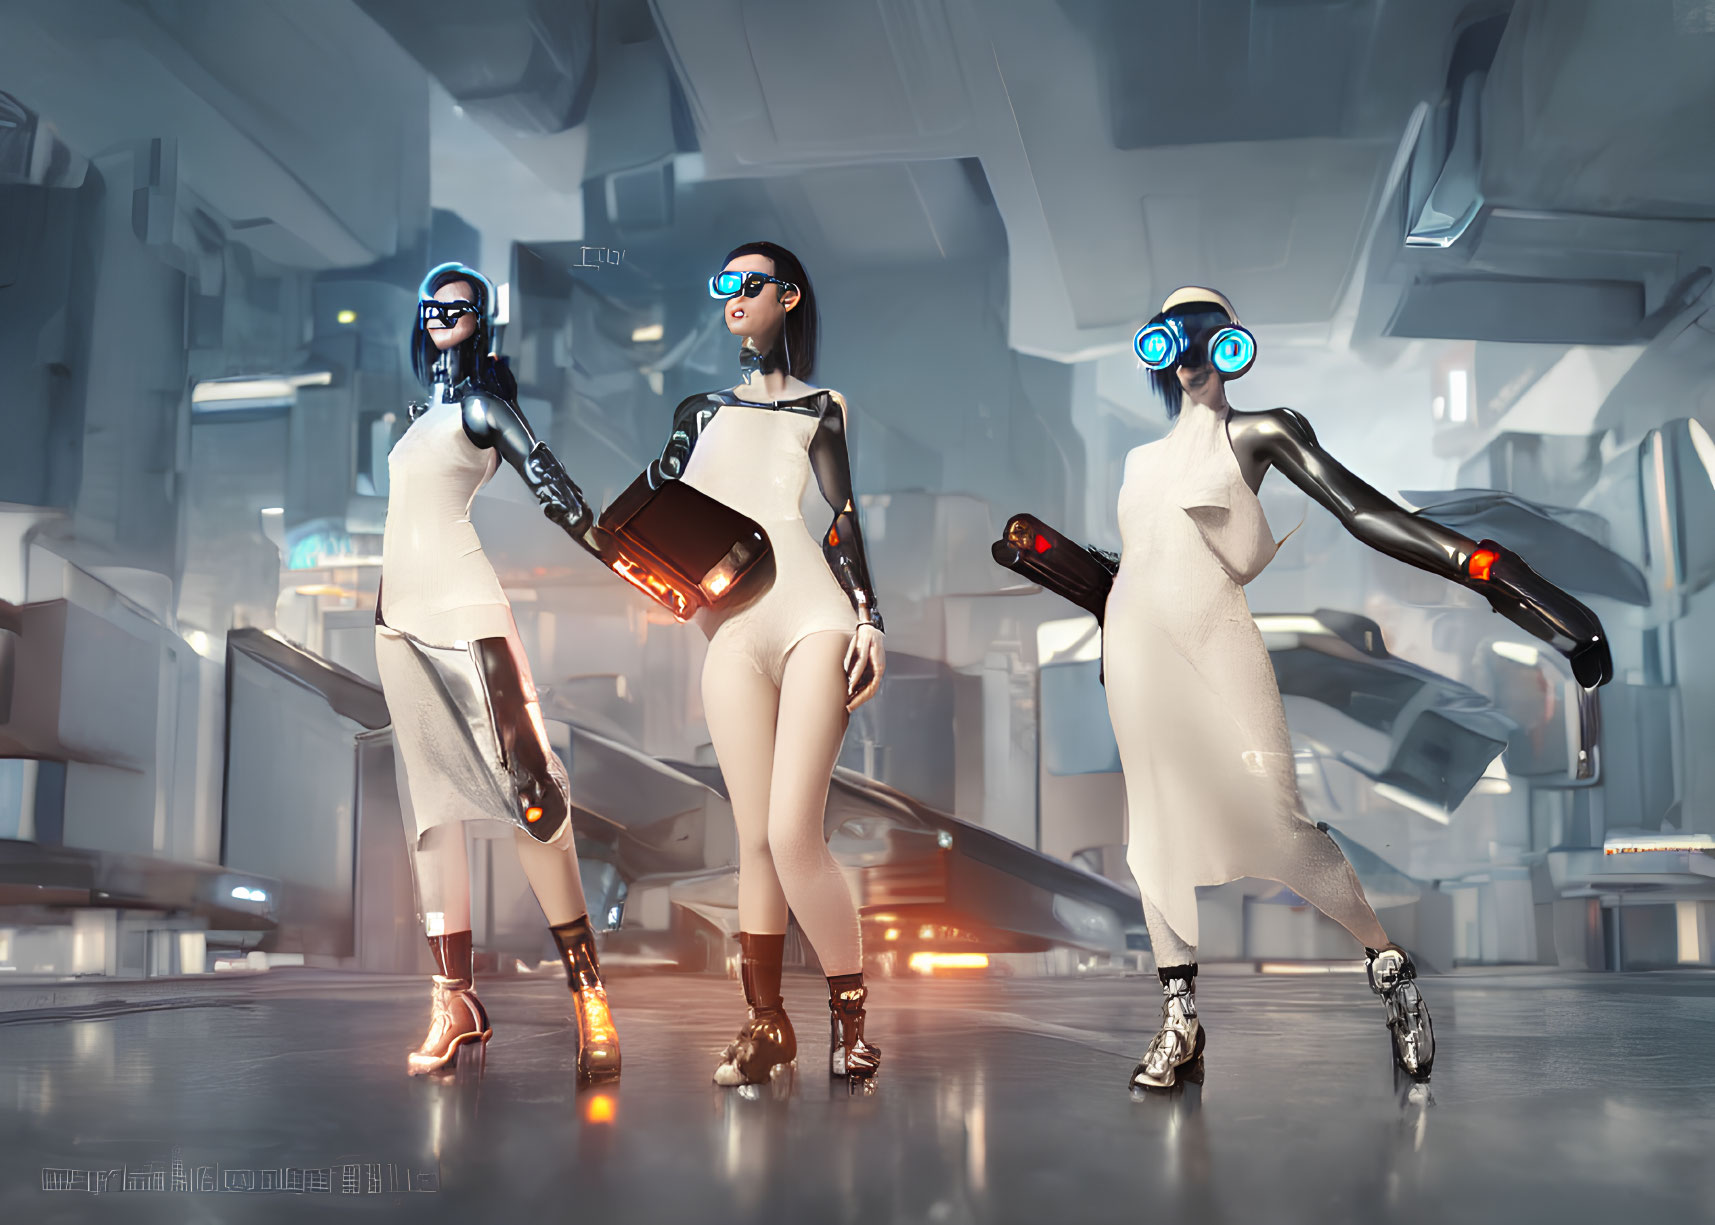 Futuristic women with cybernetic limbs in modern facility